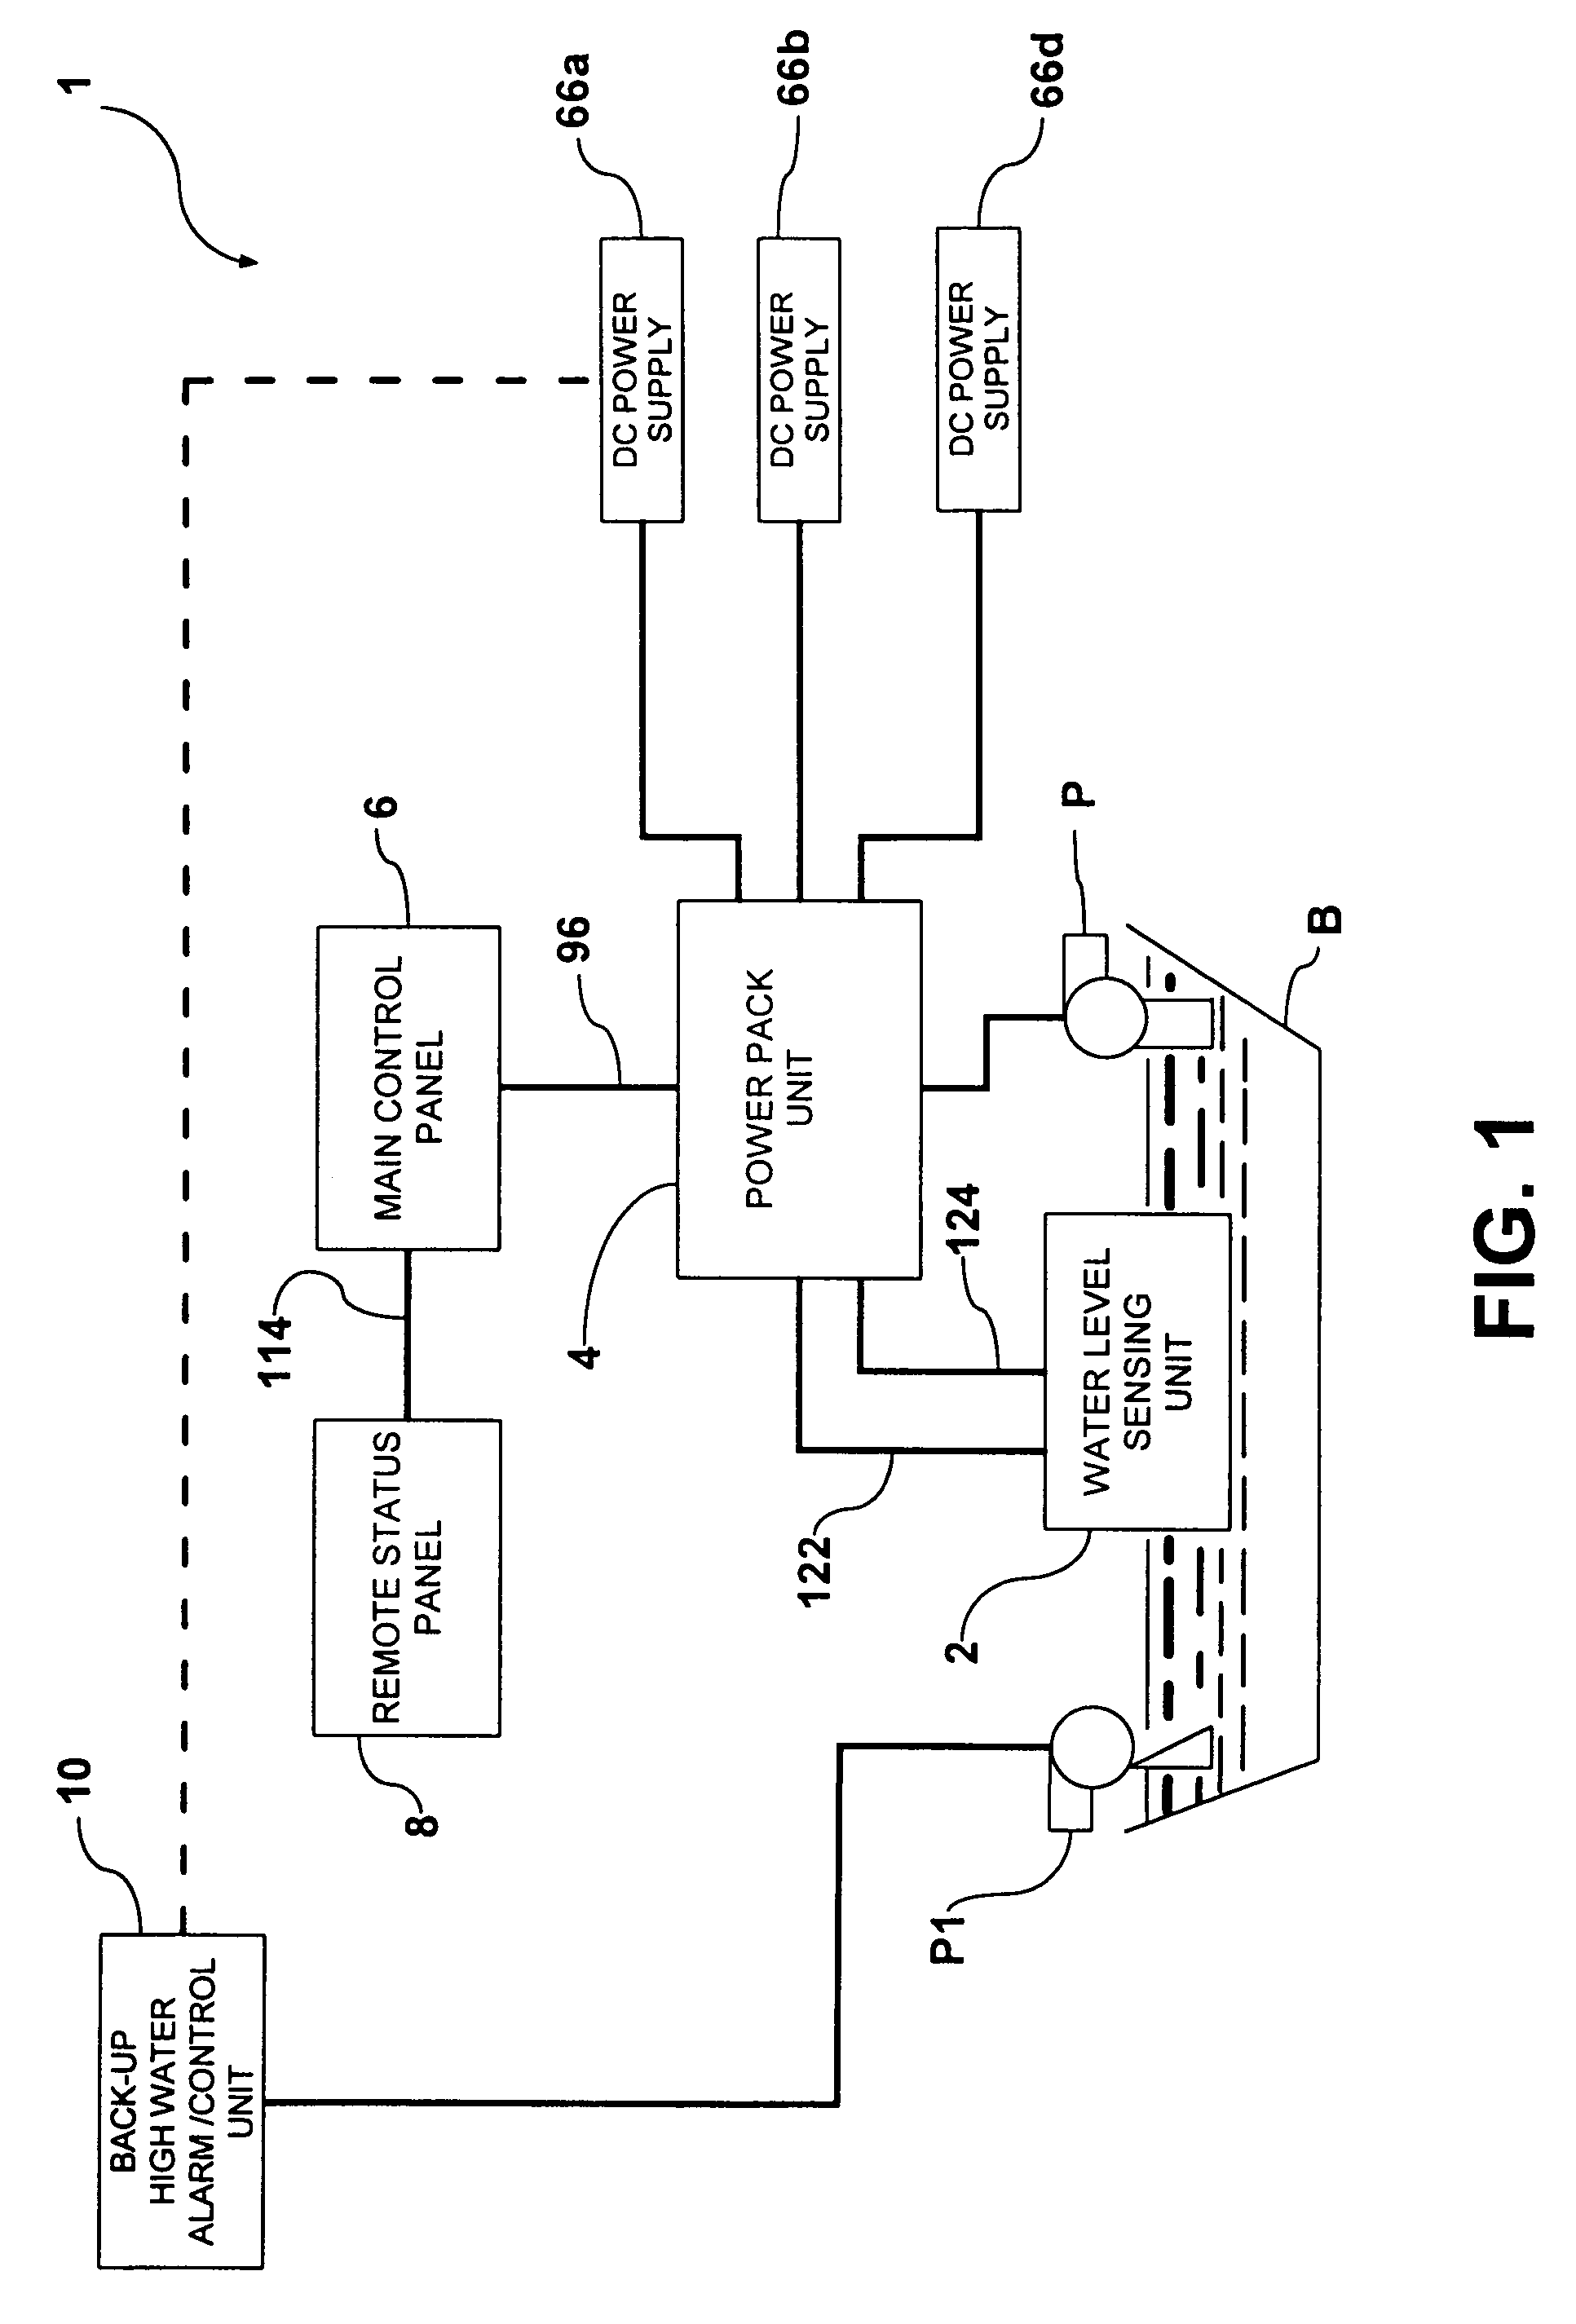 Method of and apparatus for detecting and controlling bilge water in a sea vessel